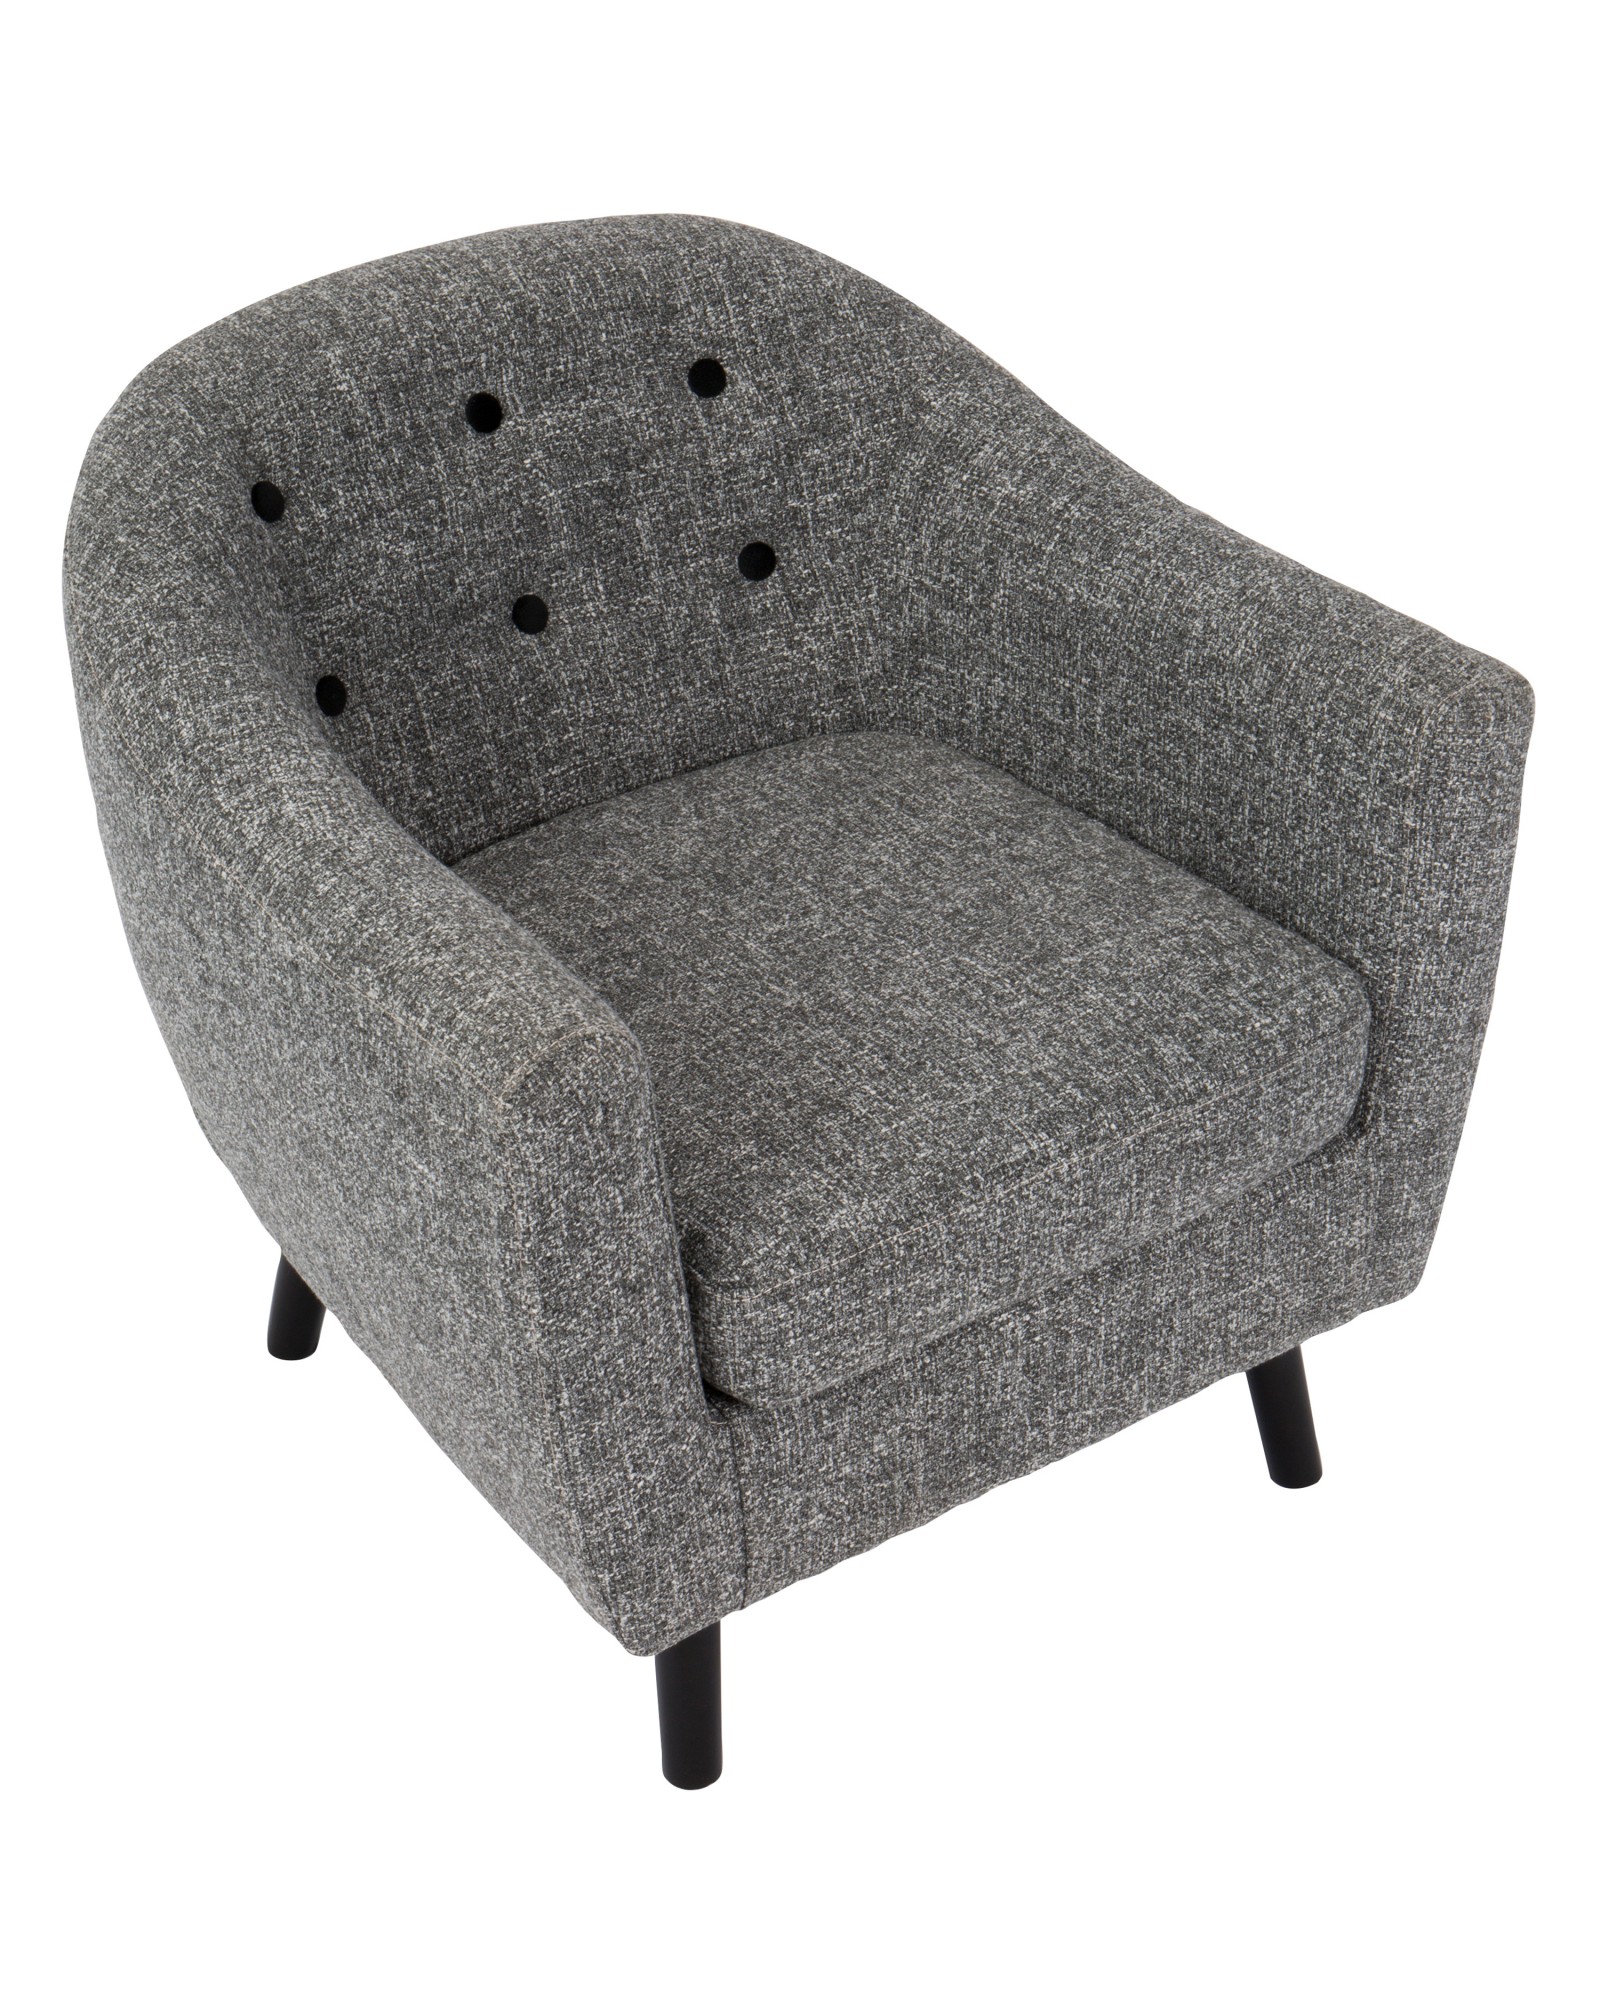 Rockwell Mid-Century Modern Accent Chair with Noise Fabric in Dark Grey